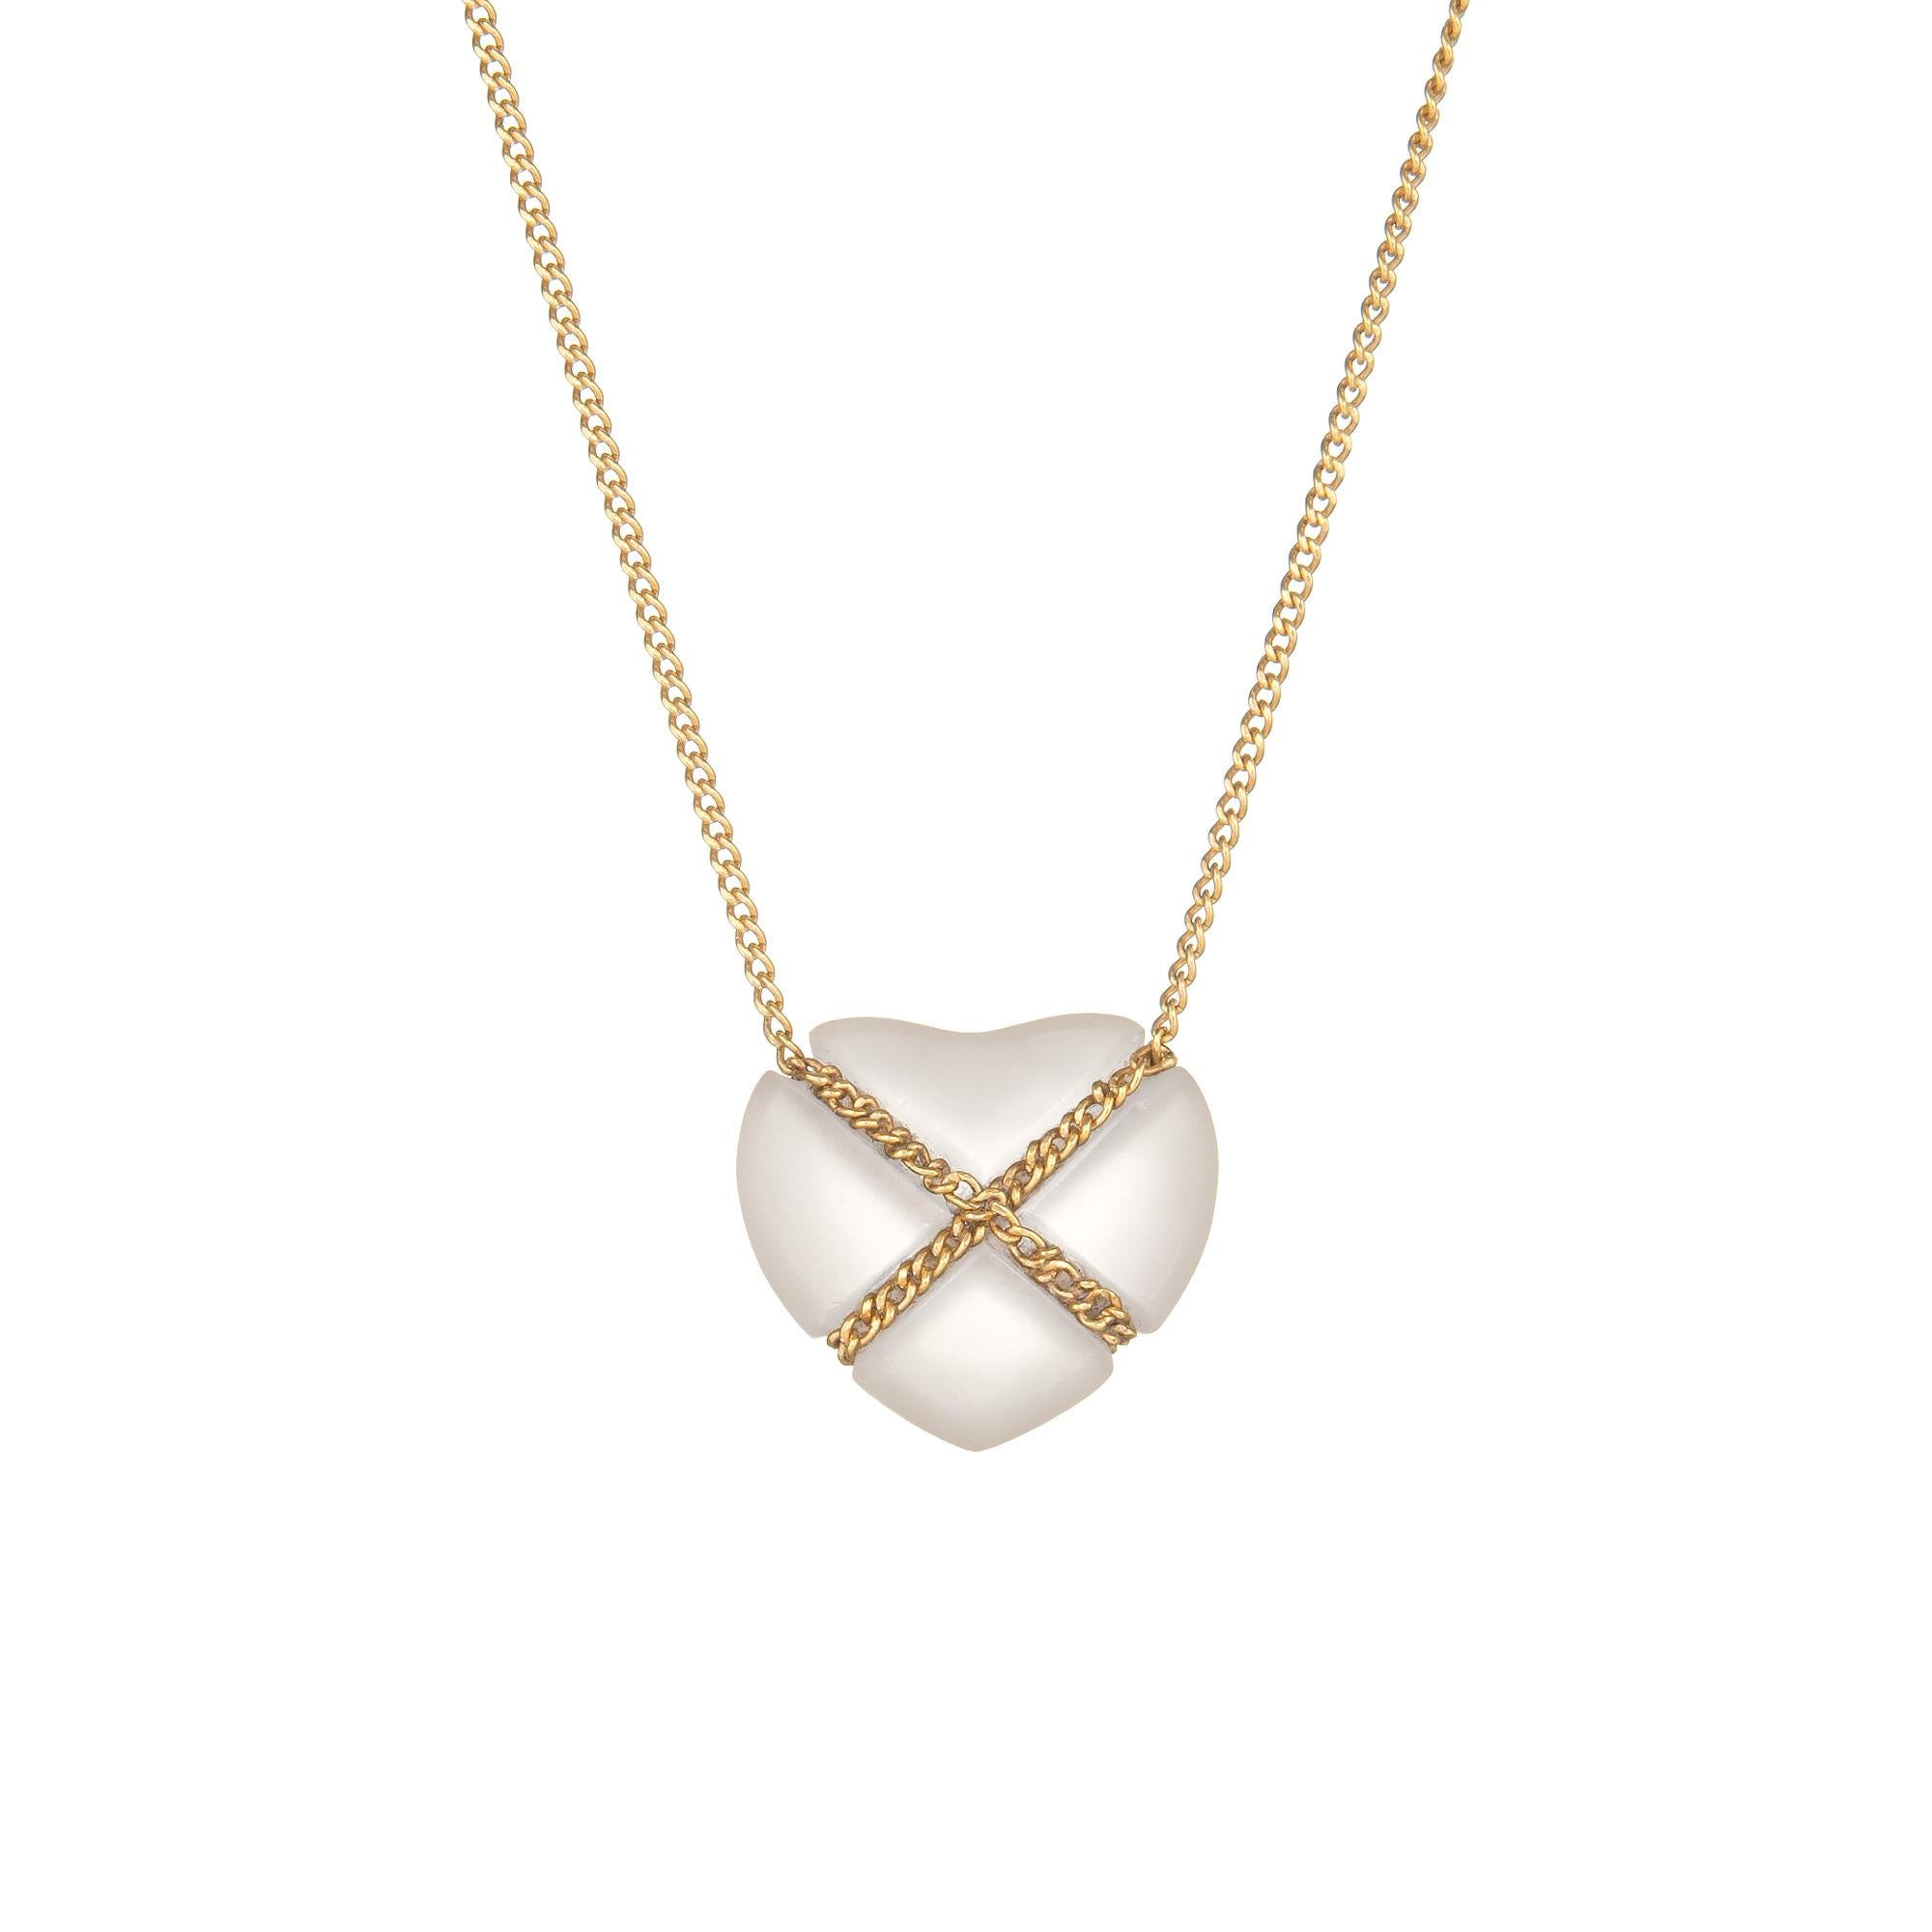 Elegant and finely detailed vintage Tiffany & Co rock crystal Cross My Heart necklace, crafted in 18 karat yellow gold. 

Rock crystal is set into the necklace and measures 14mm x 13mm. The stone is in excellent condition and free of cracks or